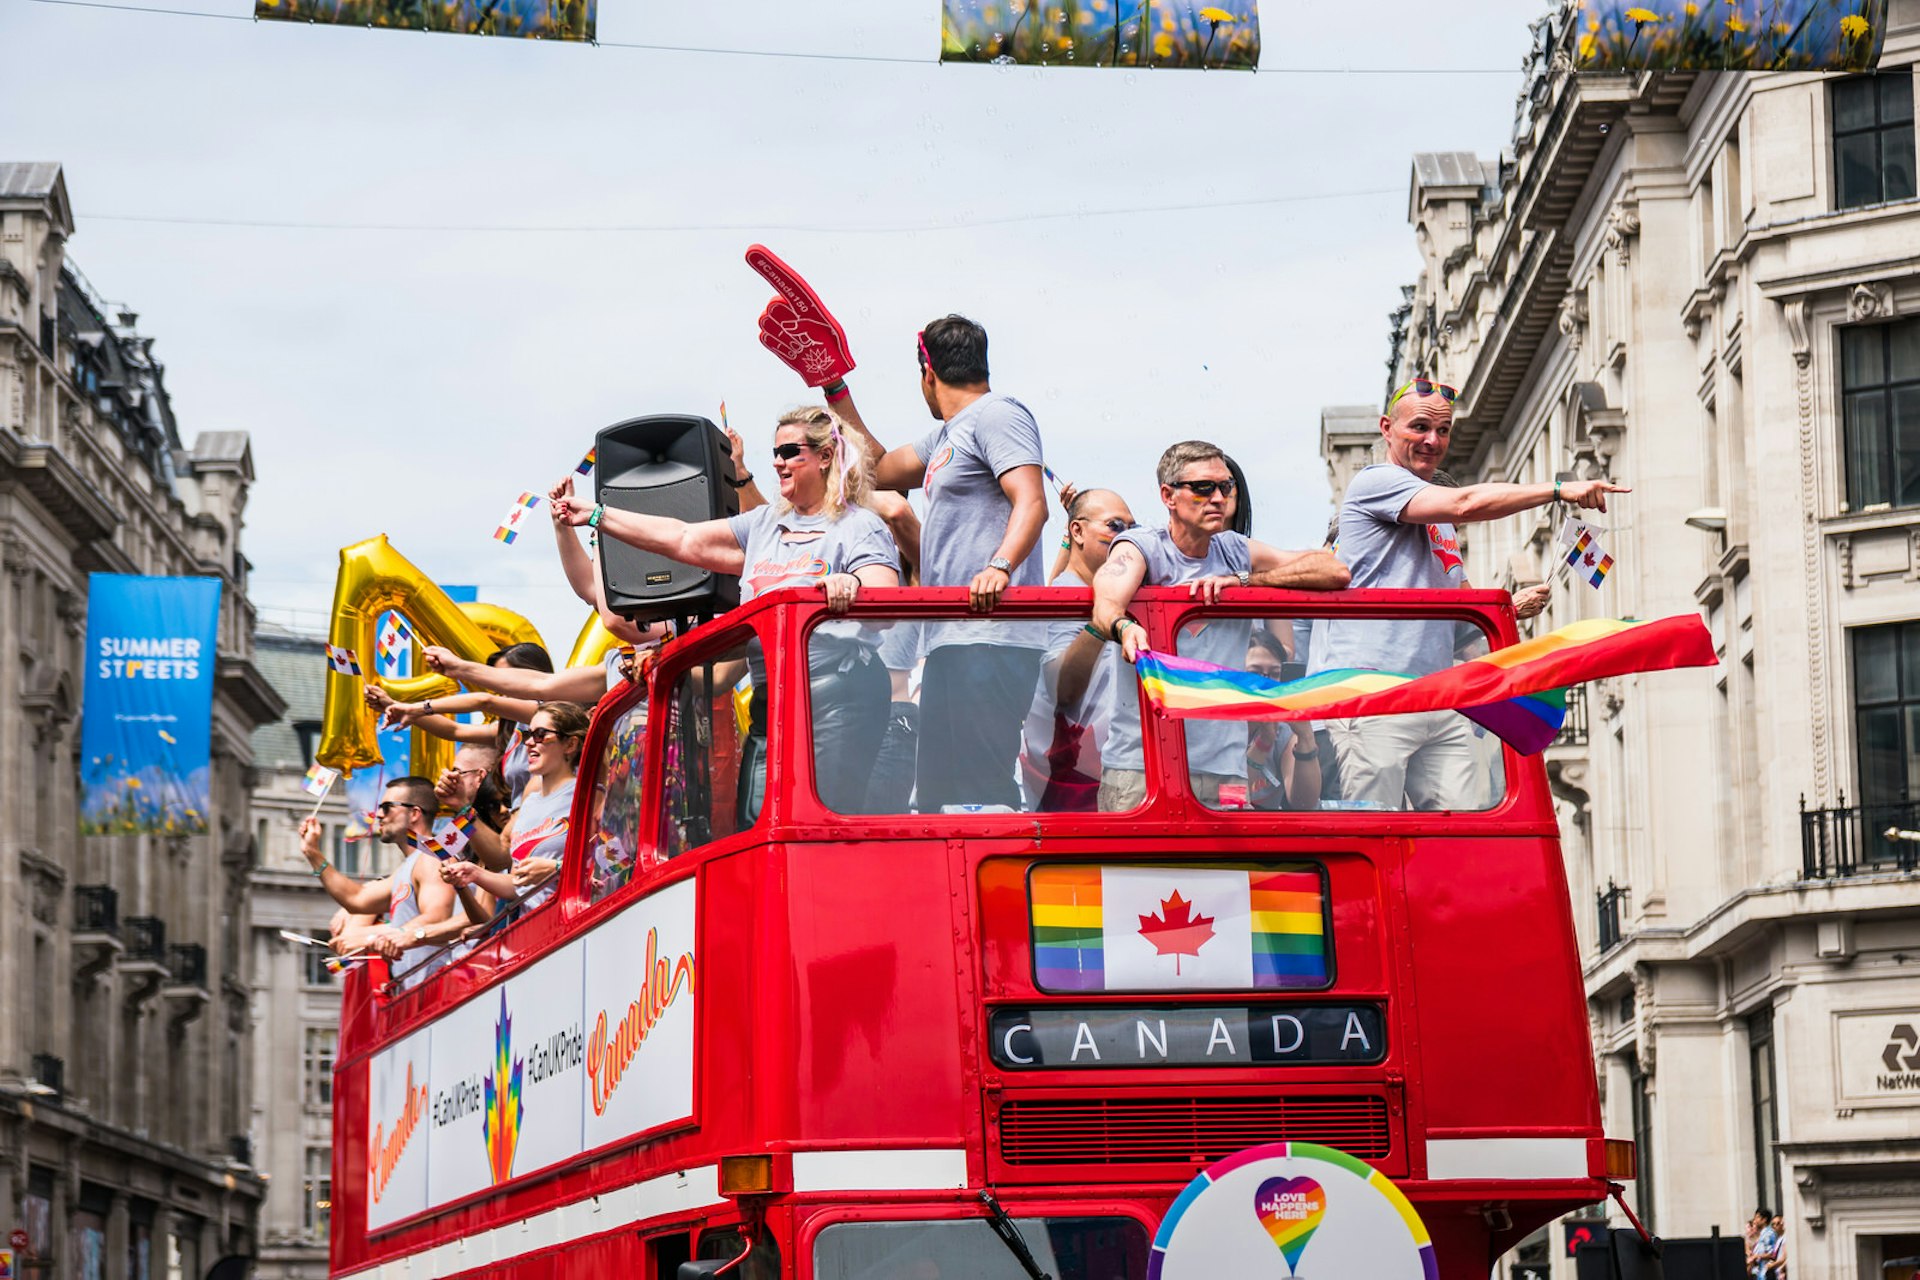 People on a topless double decker red London bus on the Pride in London parade on Regent Street; the bus' destination reads CANADA and there is a Canadian flag above it, with the normally red stripes replaced by rainbow colours